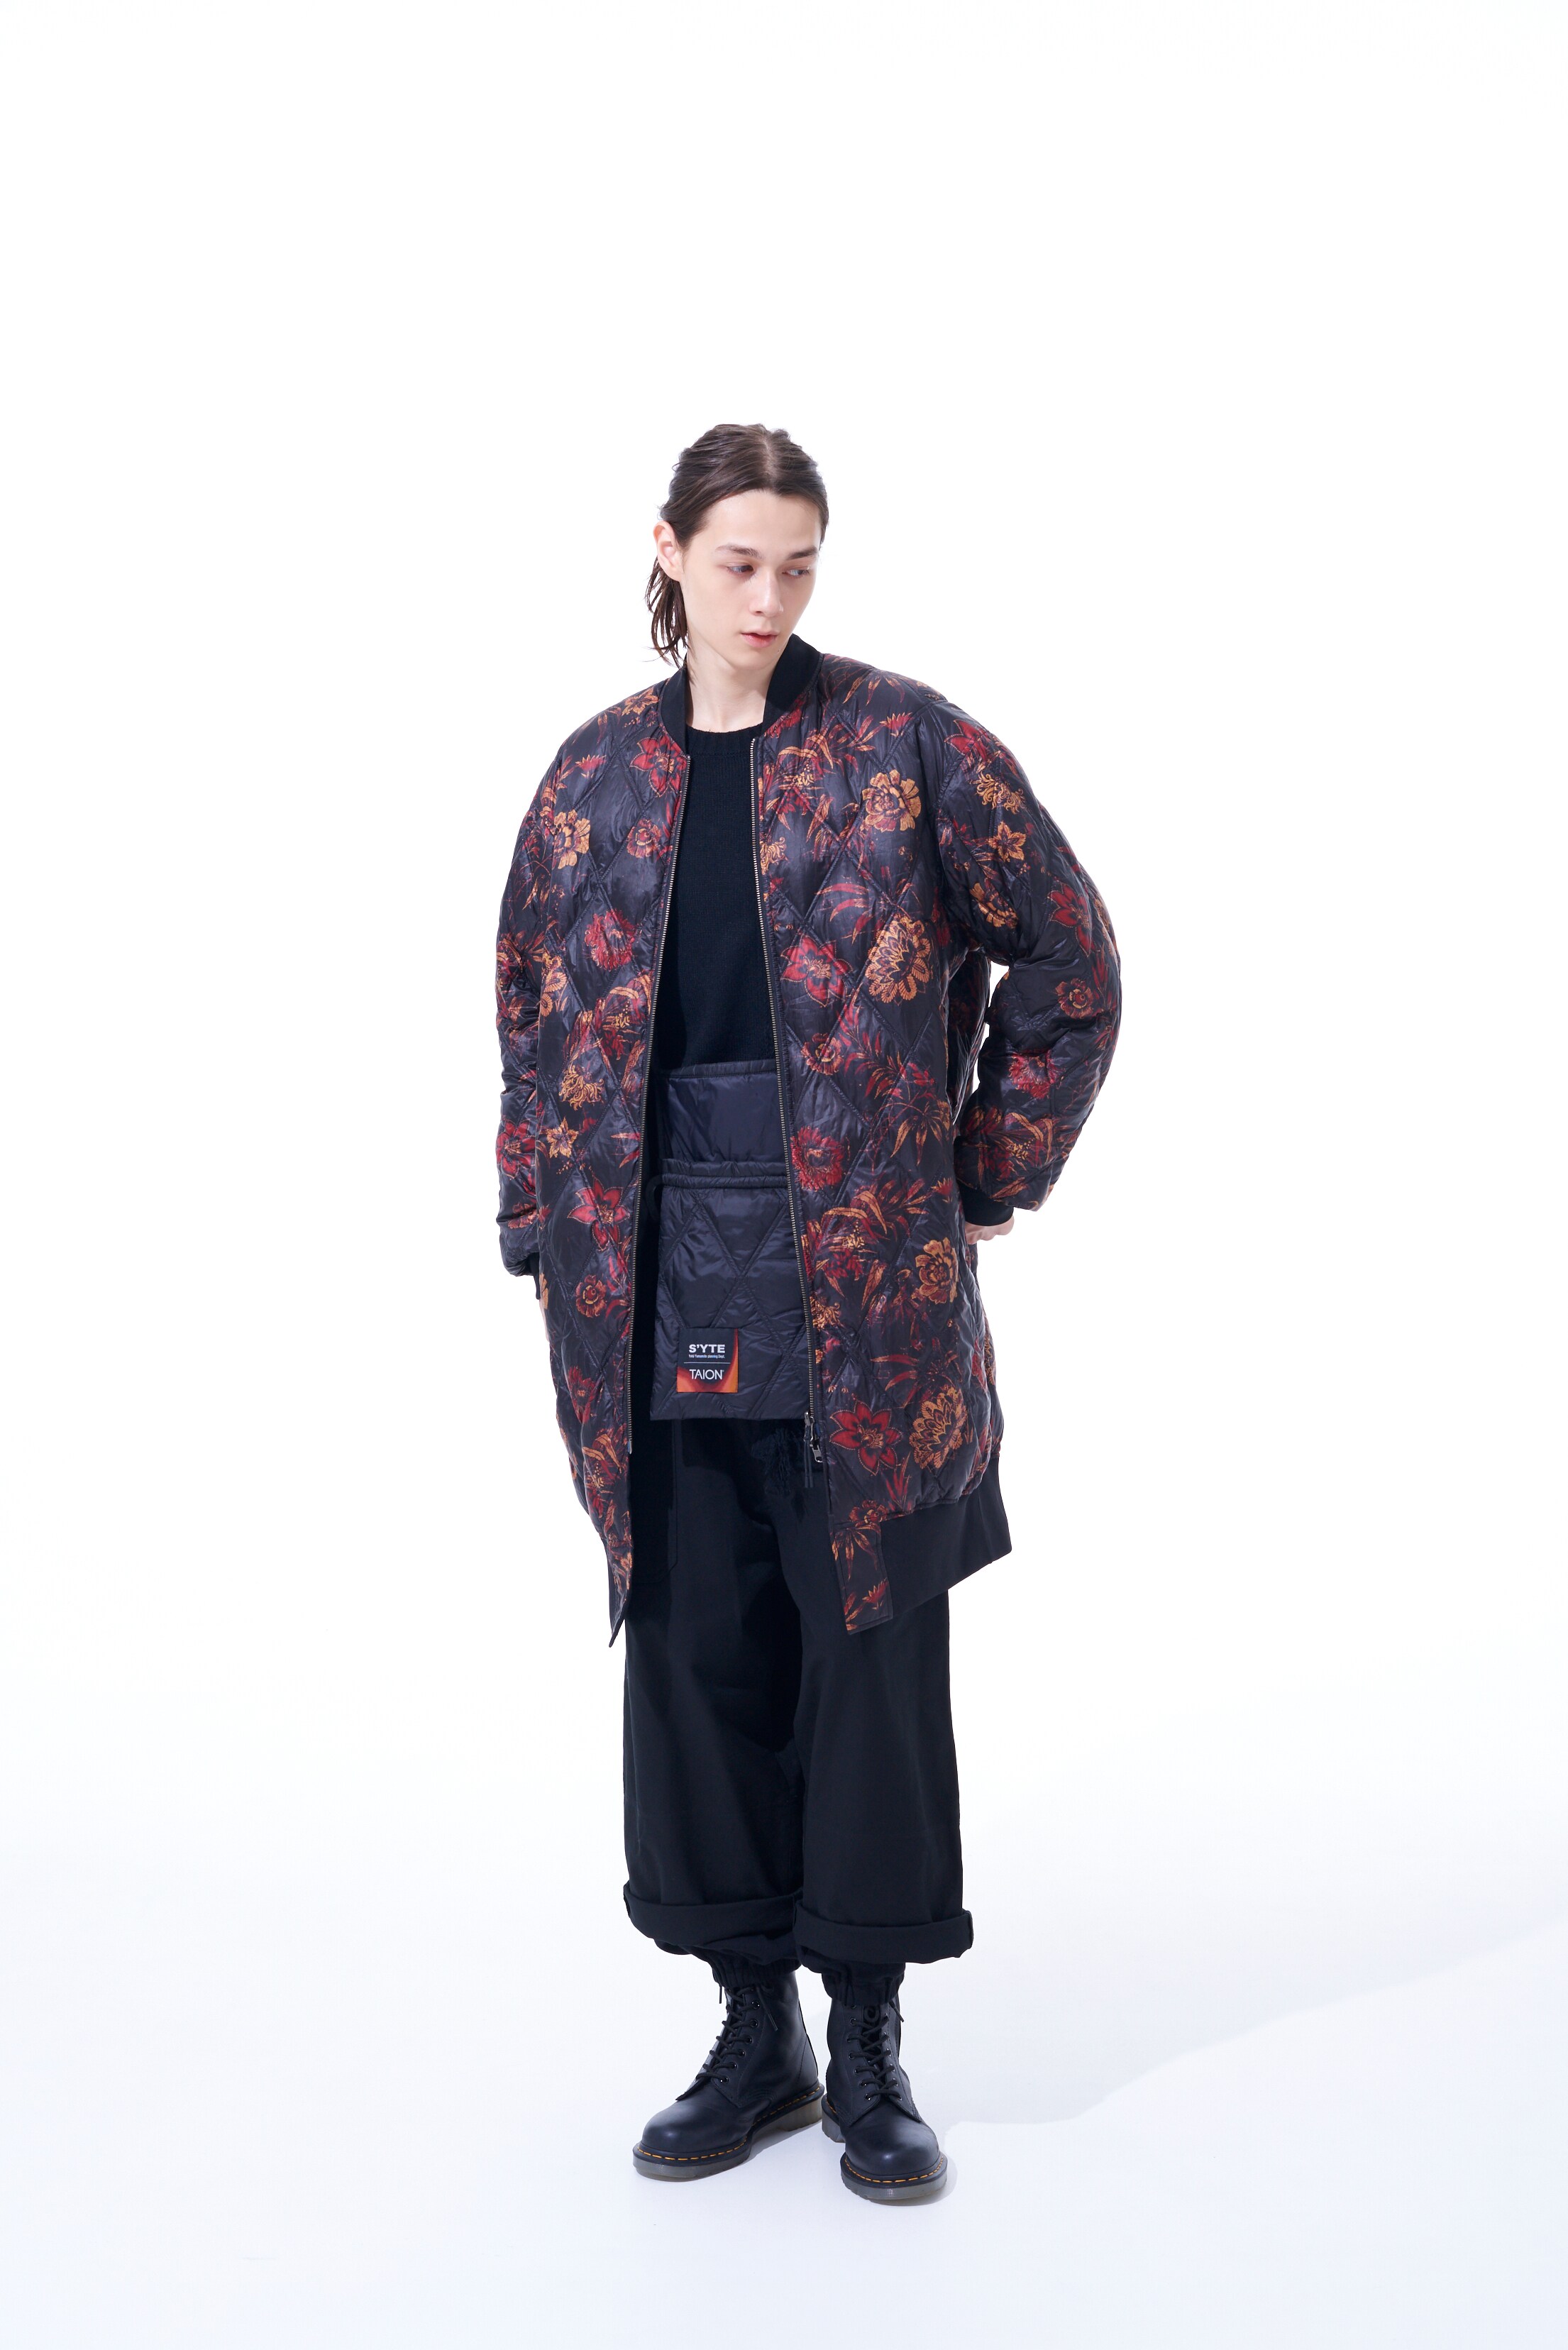 S'YTE x TAION】Collaboration Collection FLORAL PATTERN QUILTED 